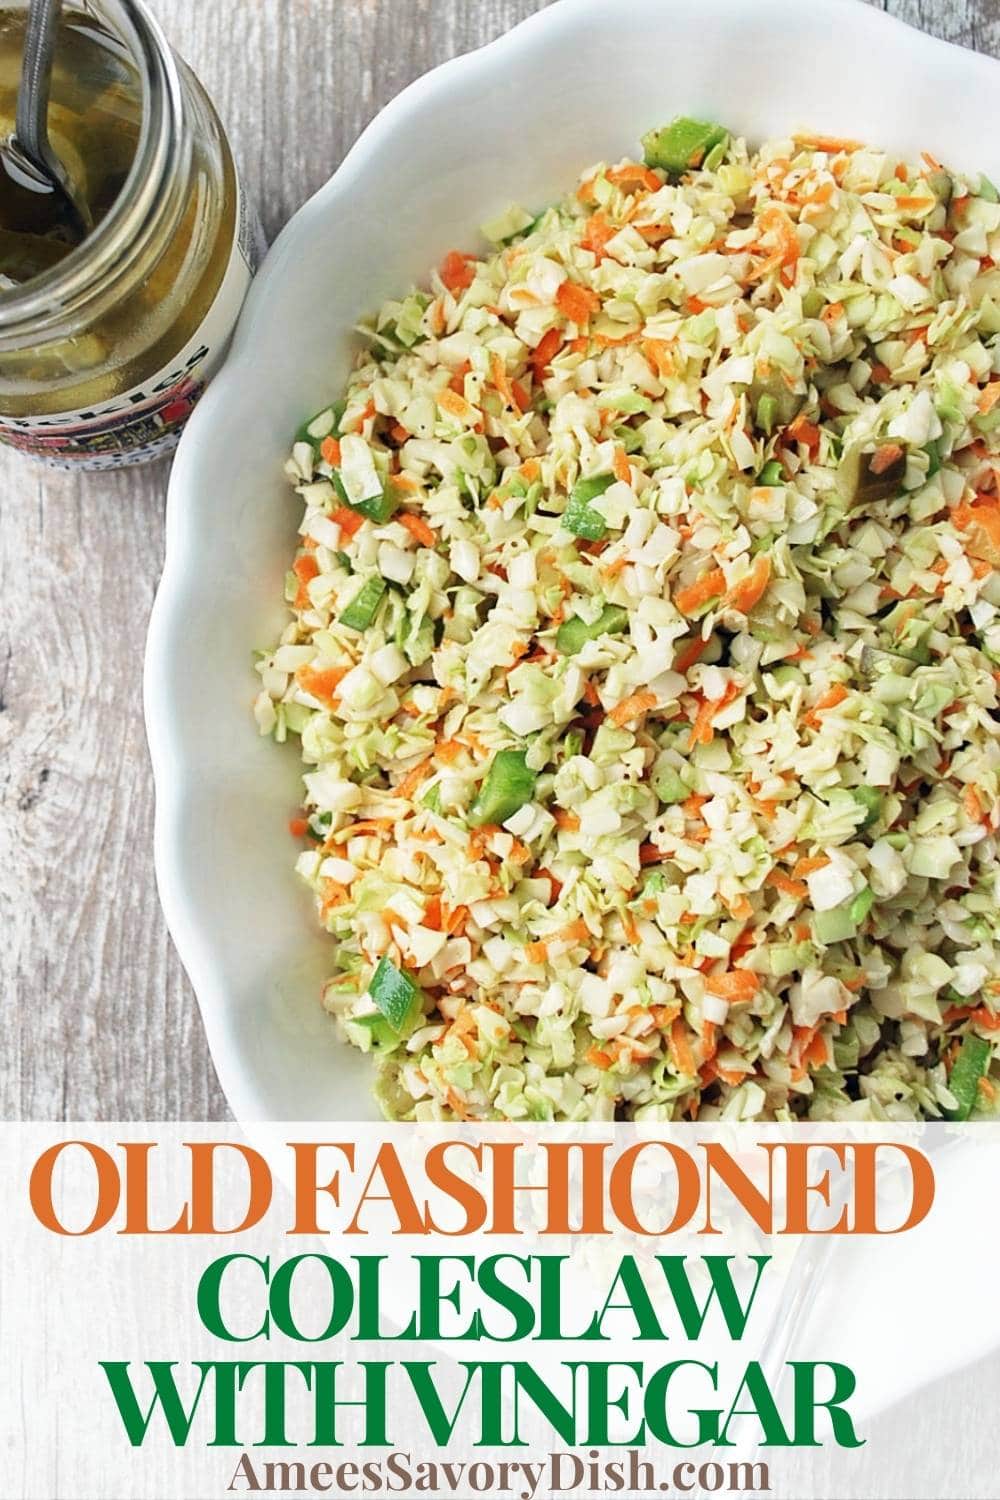 This Old Fashioned Coleslaw with Vinegar is the quintessential southern slaw to make for your next cookout. Easy and delicious! via @Ameessavorydish